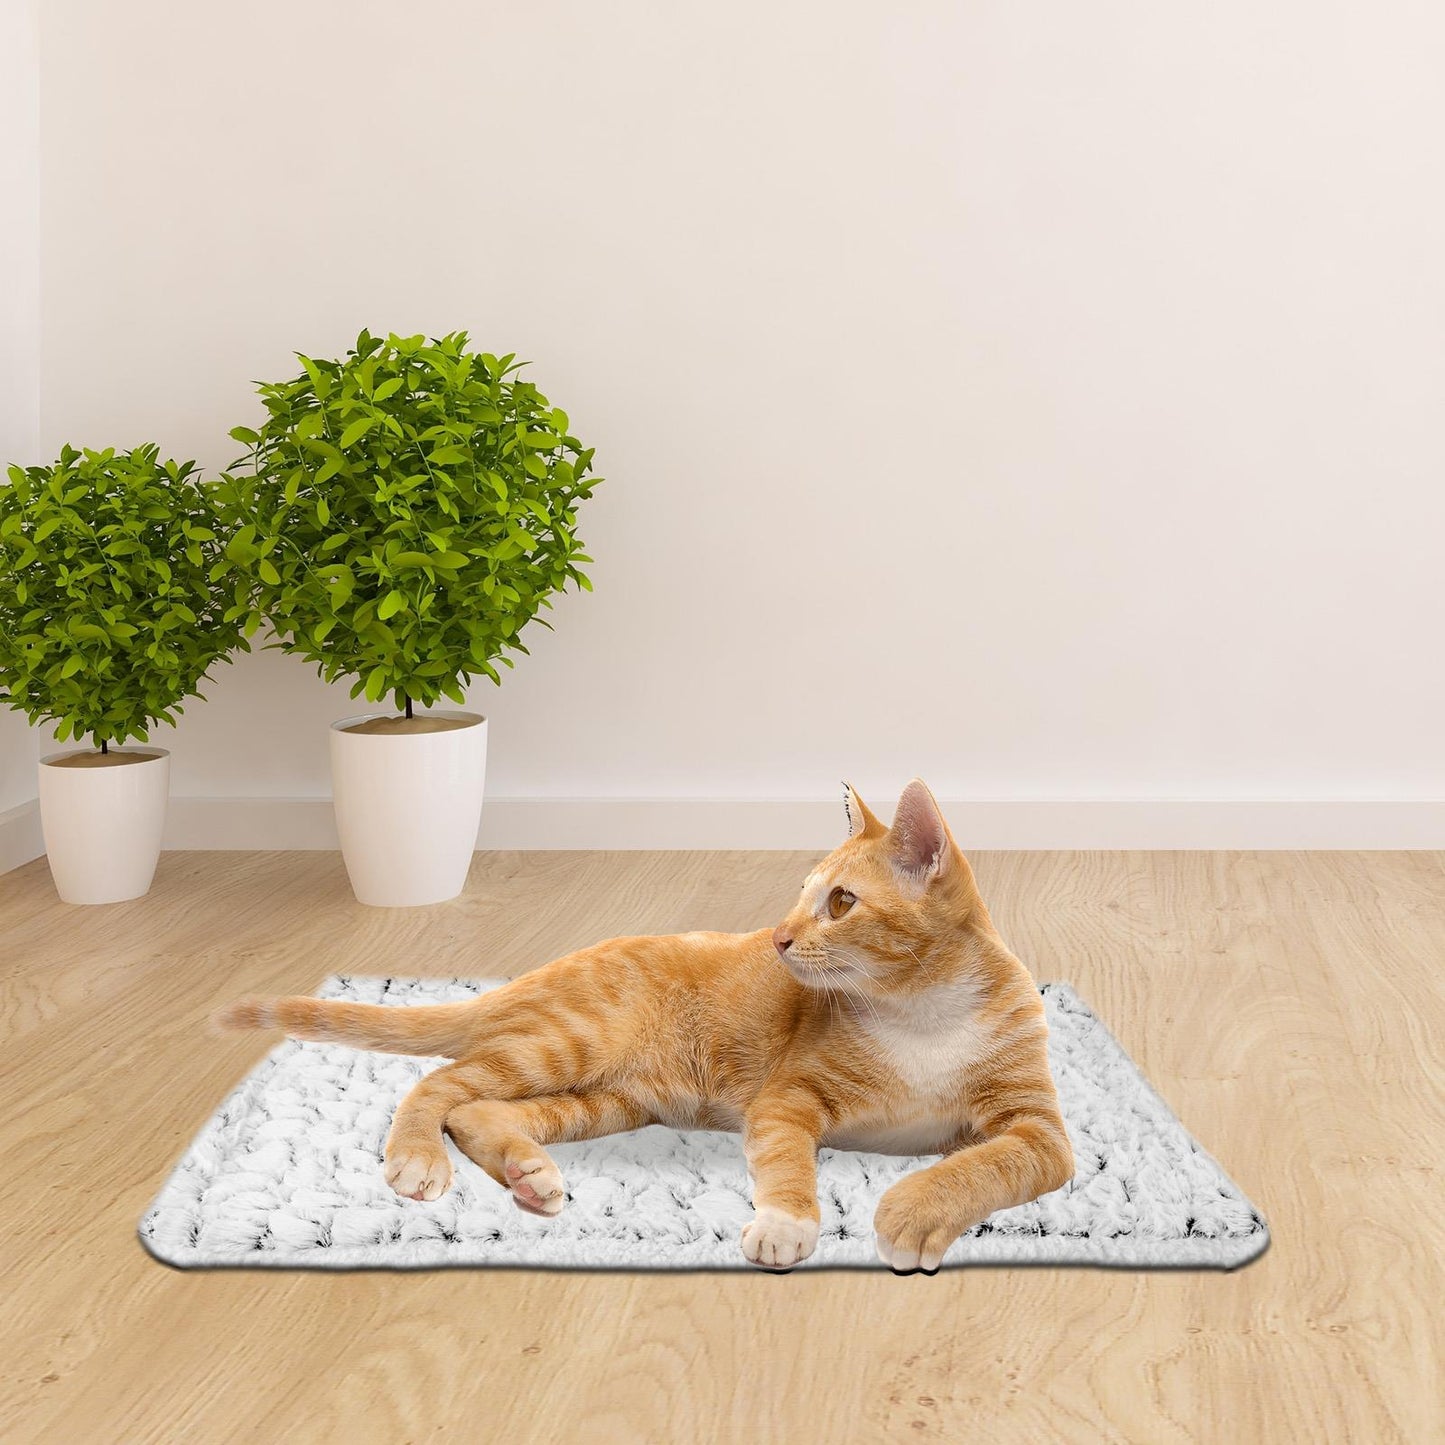 Radiator Bed For Cats With Self-Heating Thermal Material